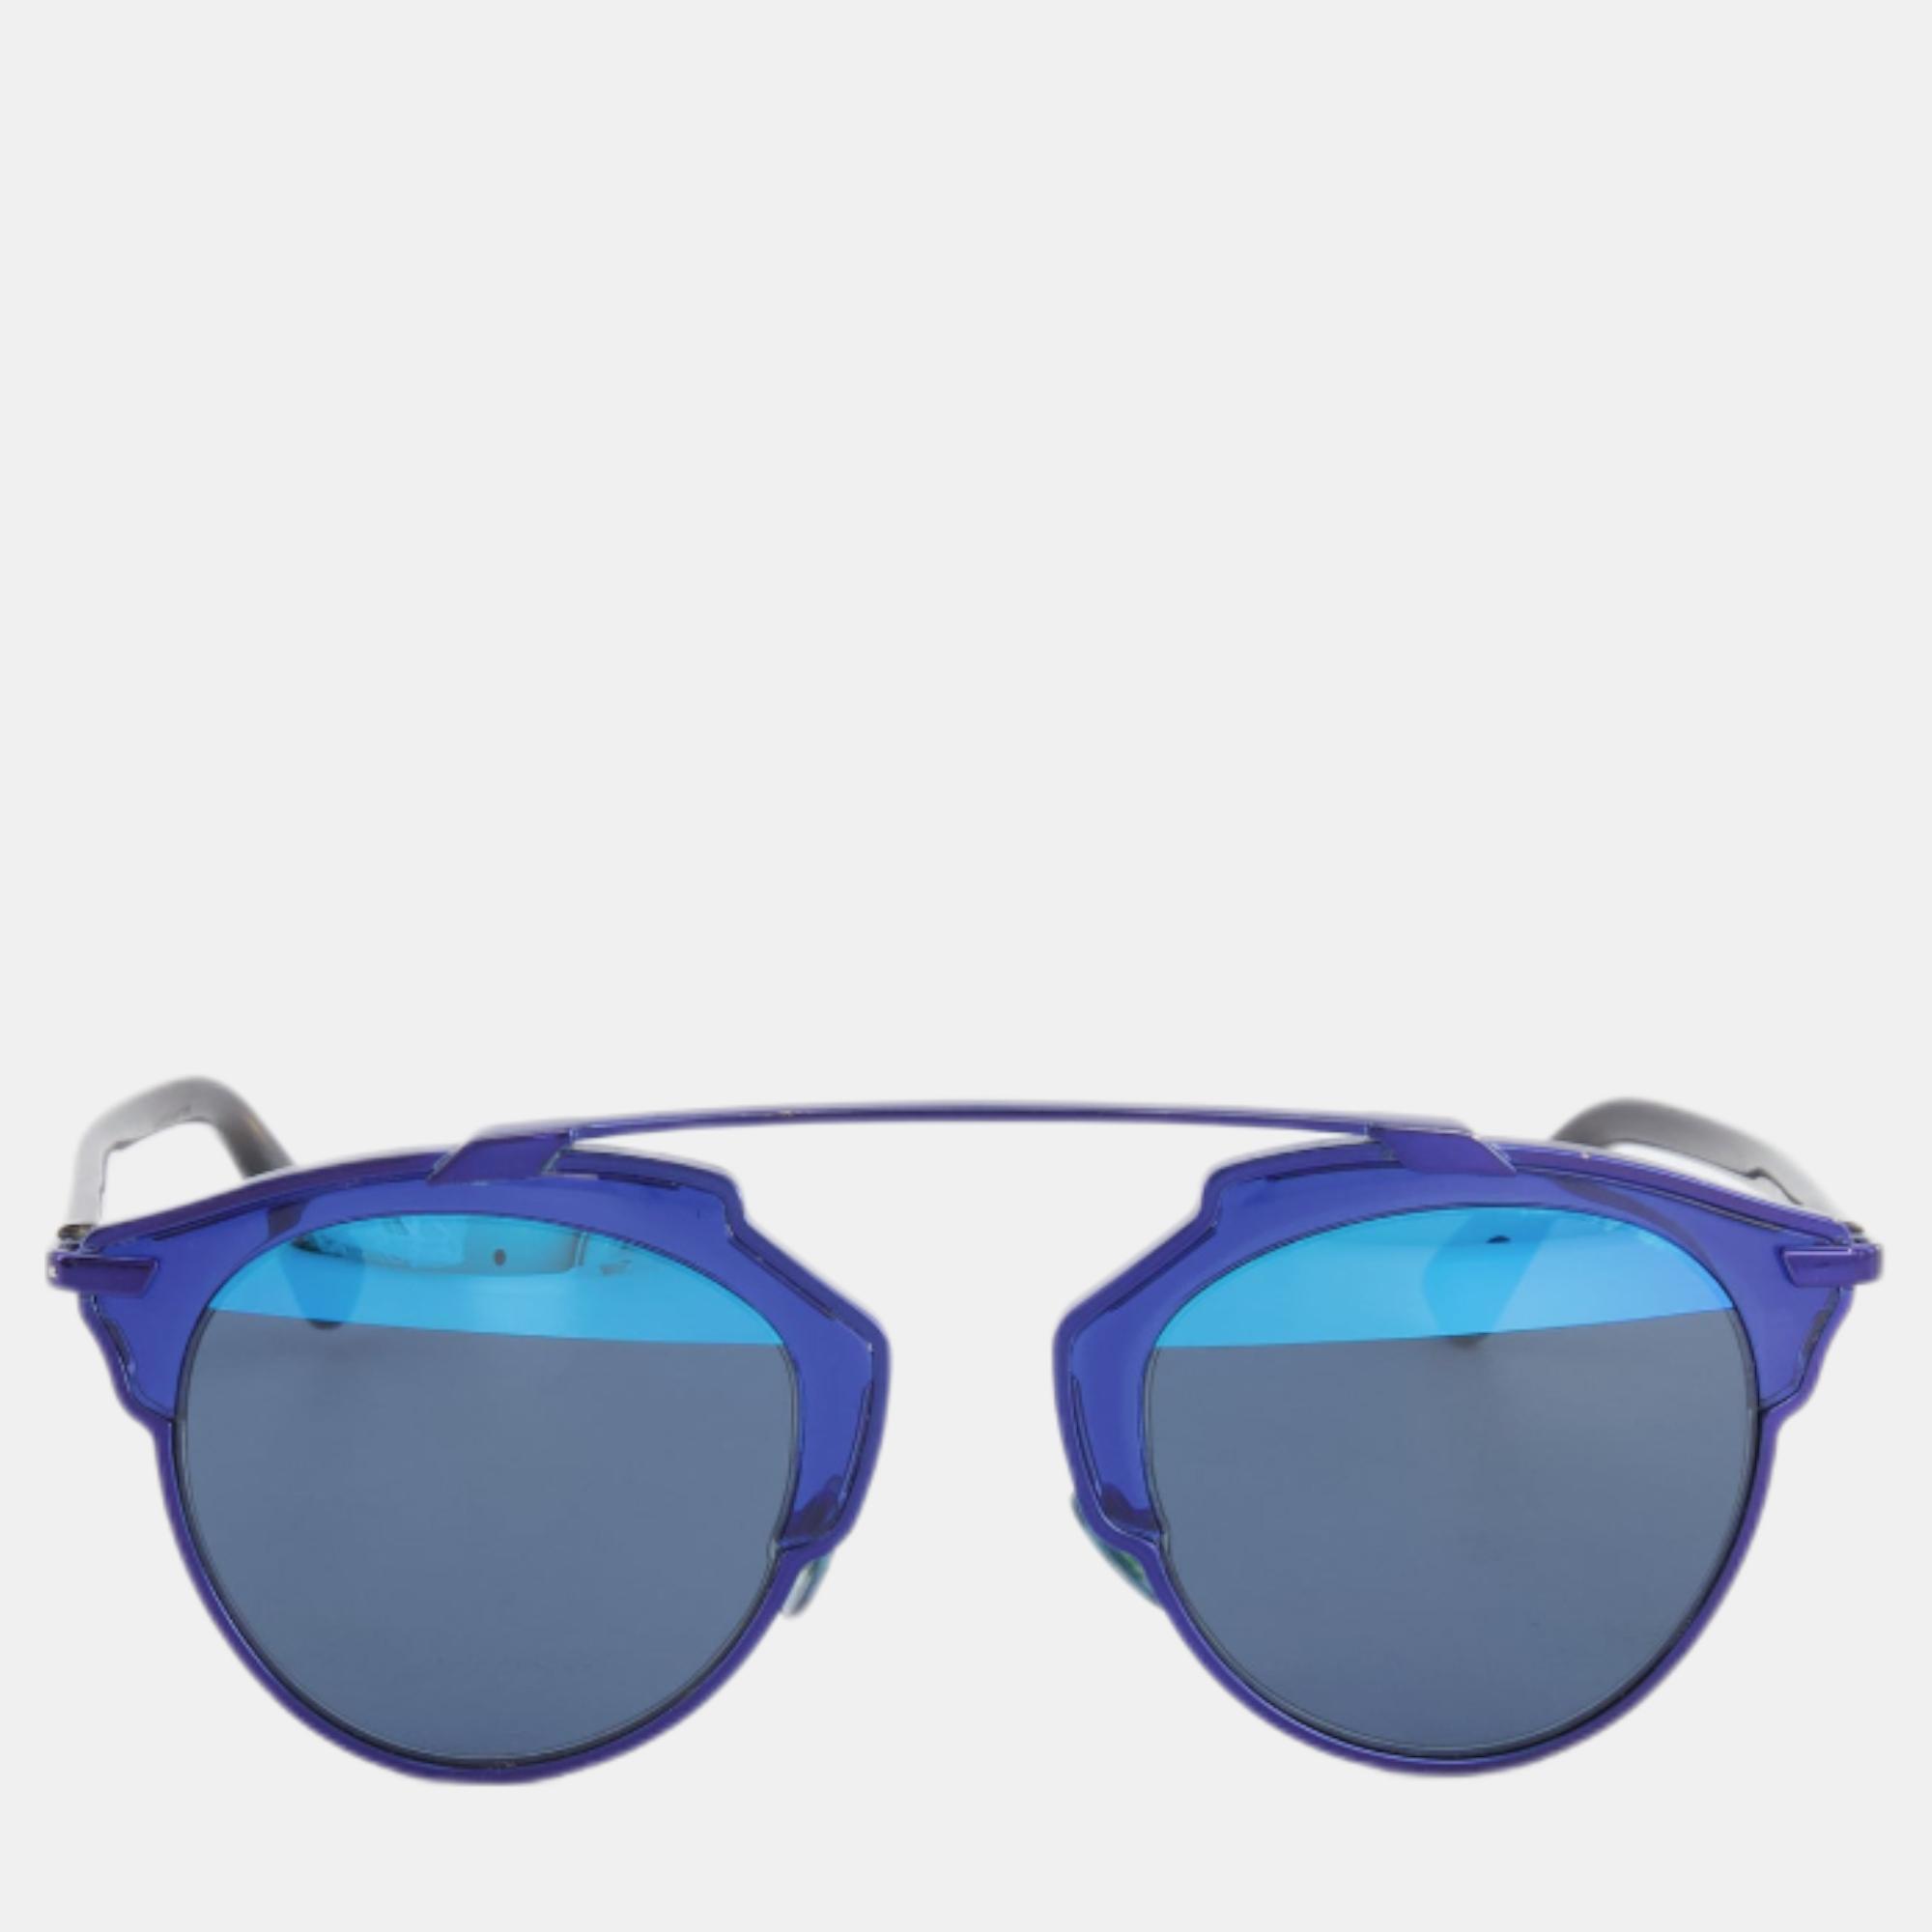 

Christian Dior Electric Blue So Real Sunglasses